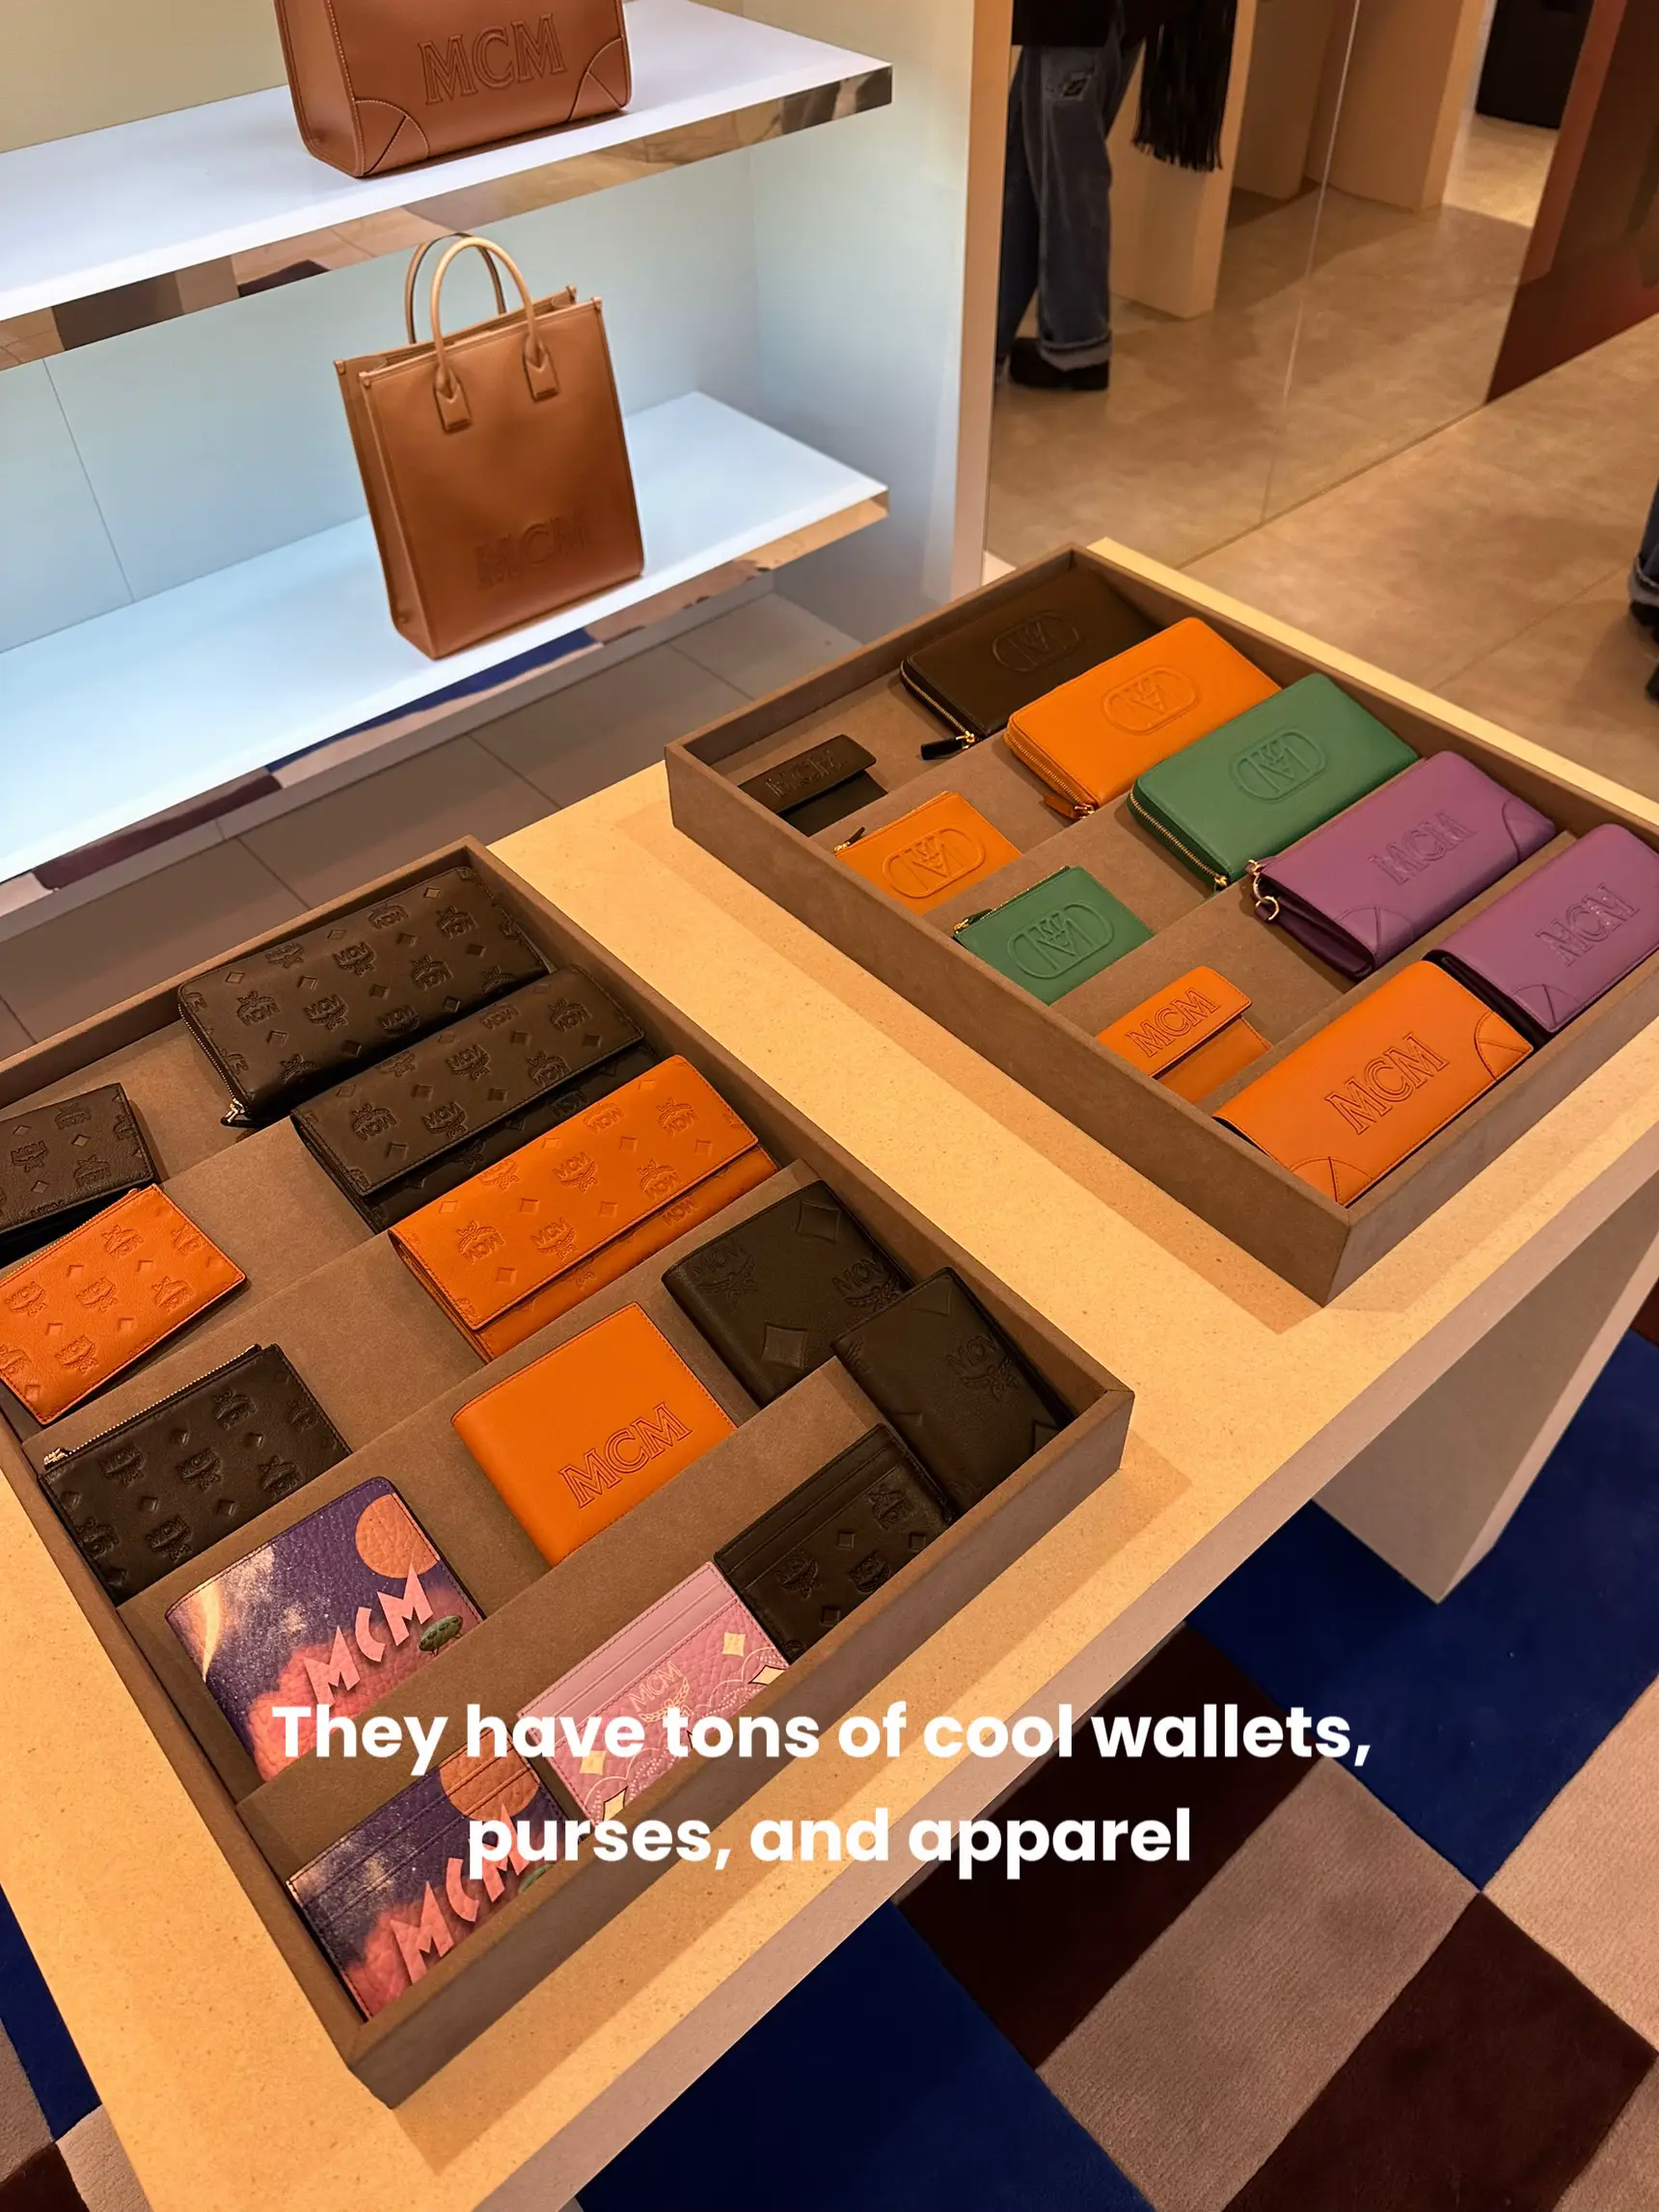 Discover MCM's Luxe Pop-Up at Macy's Herald Square